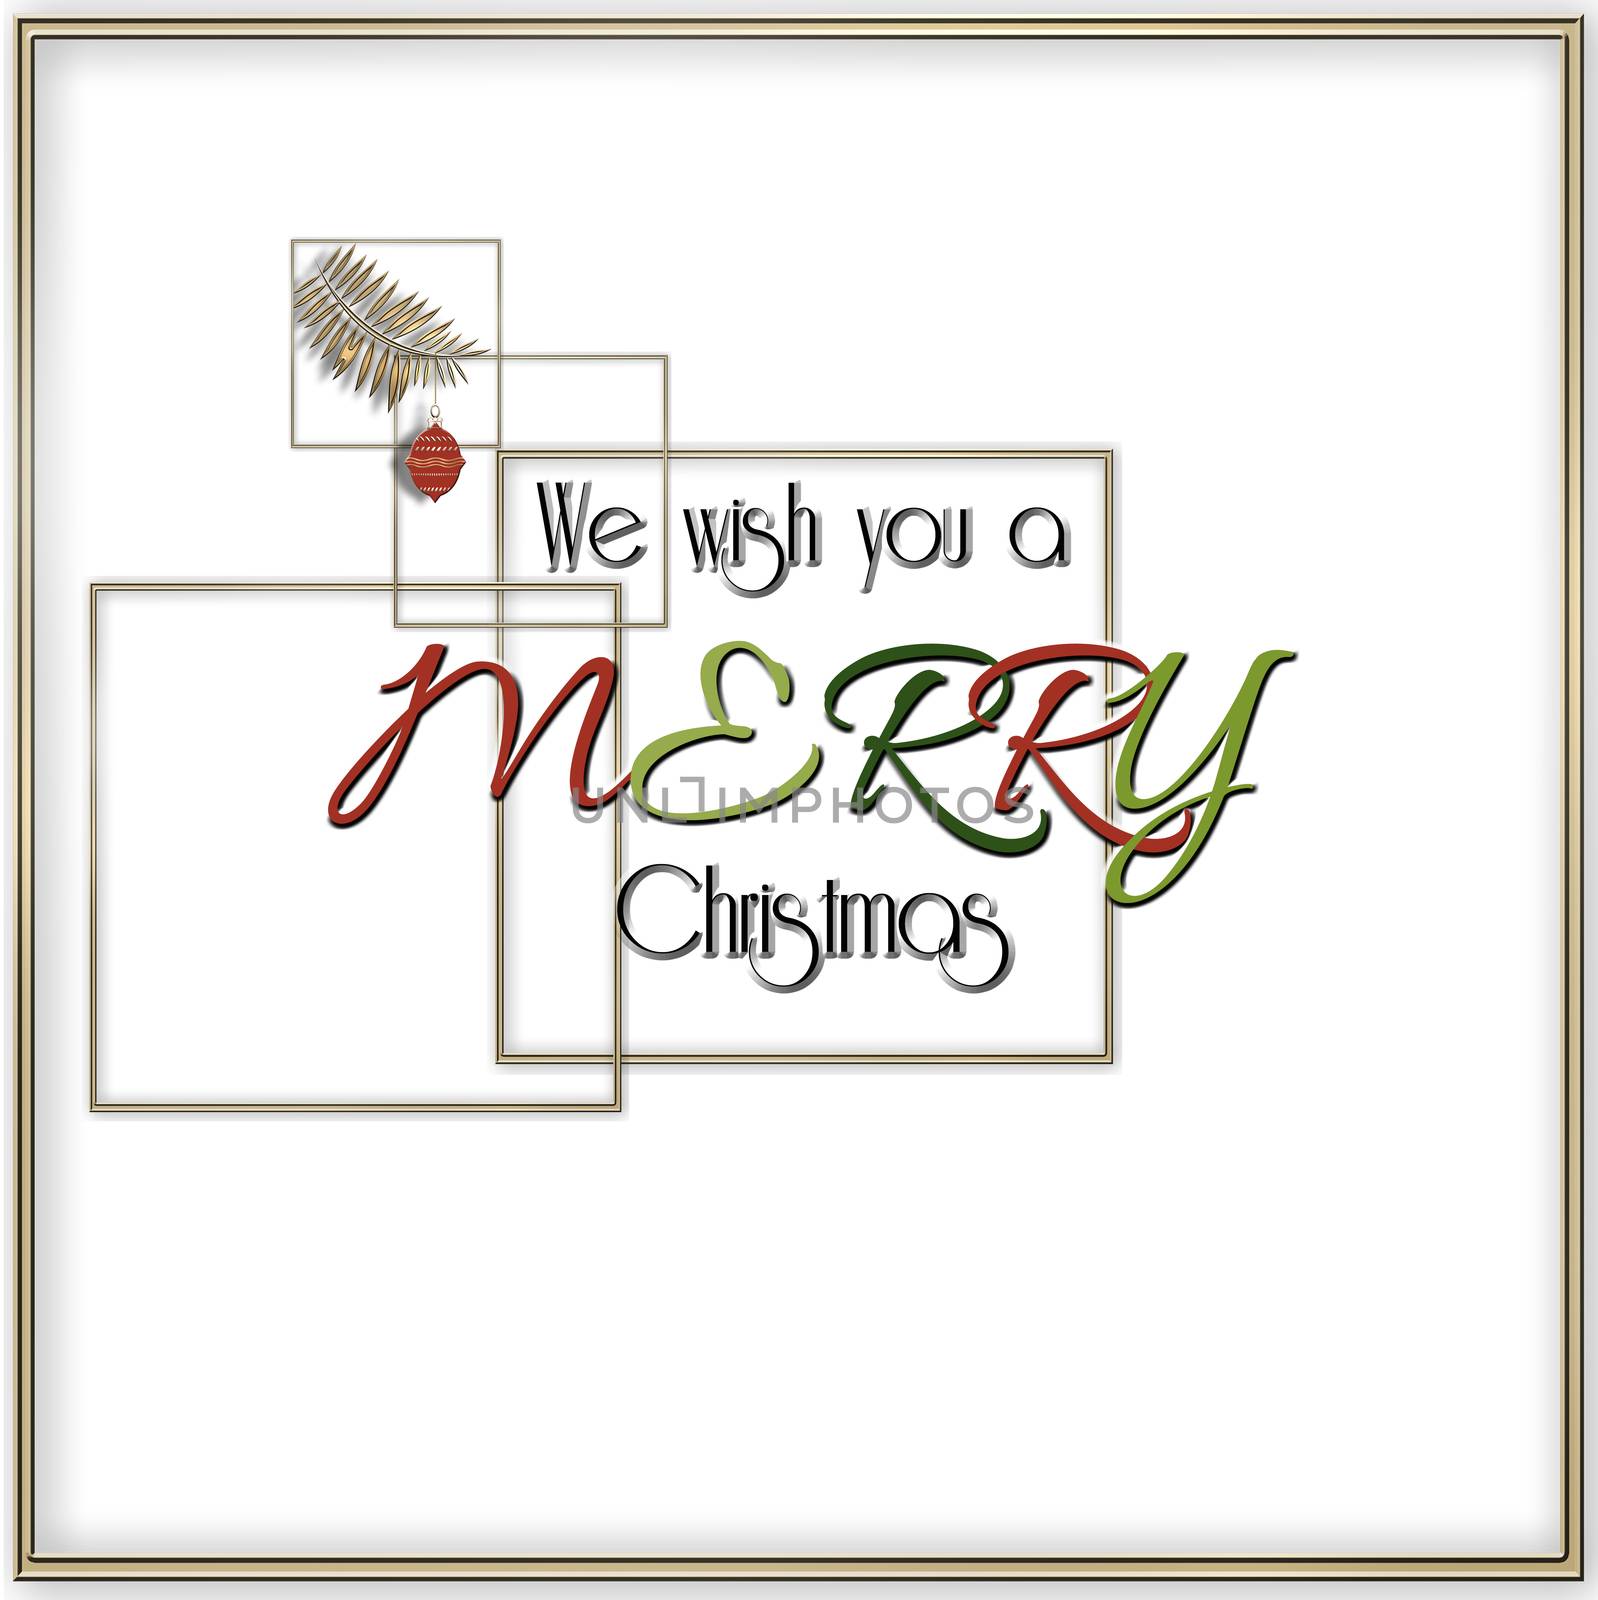 We wish You a Merry Christmas card by NelliPolk